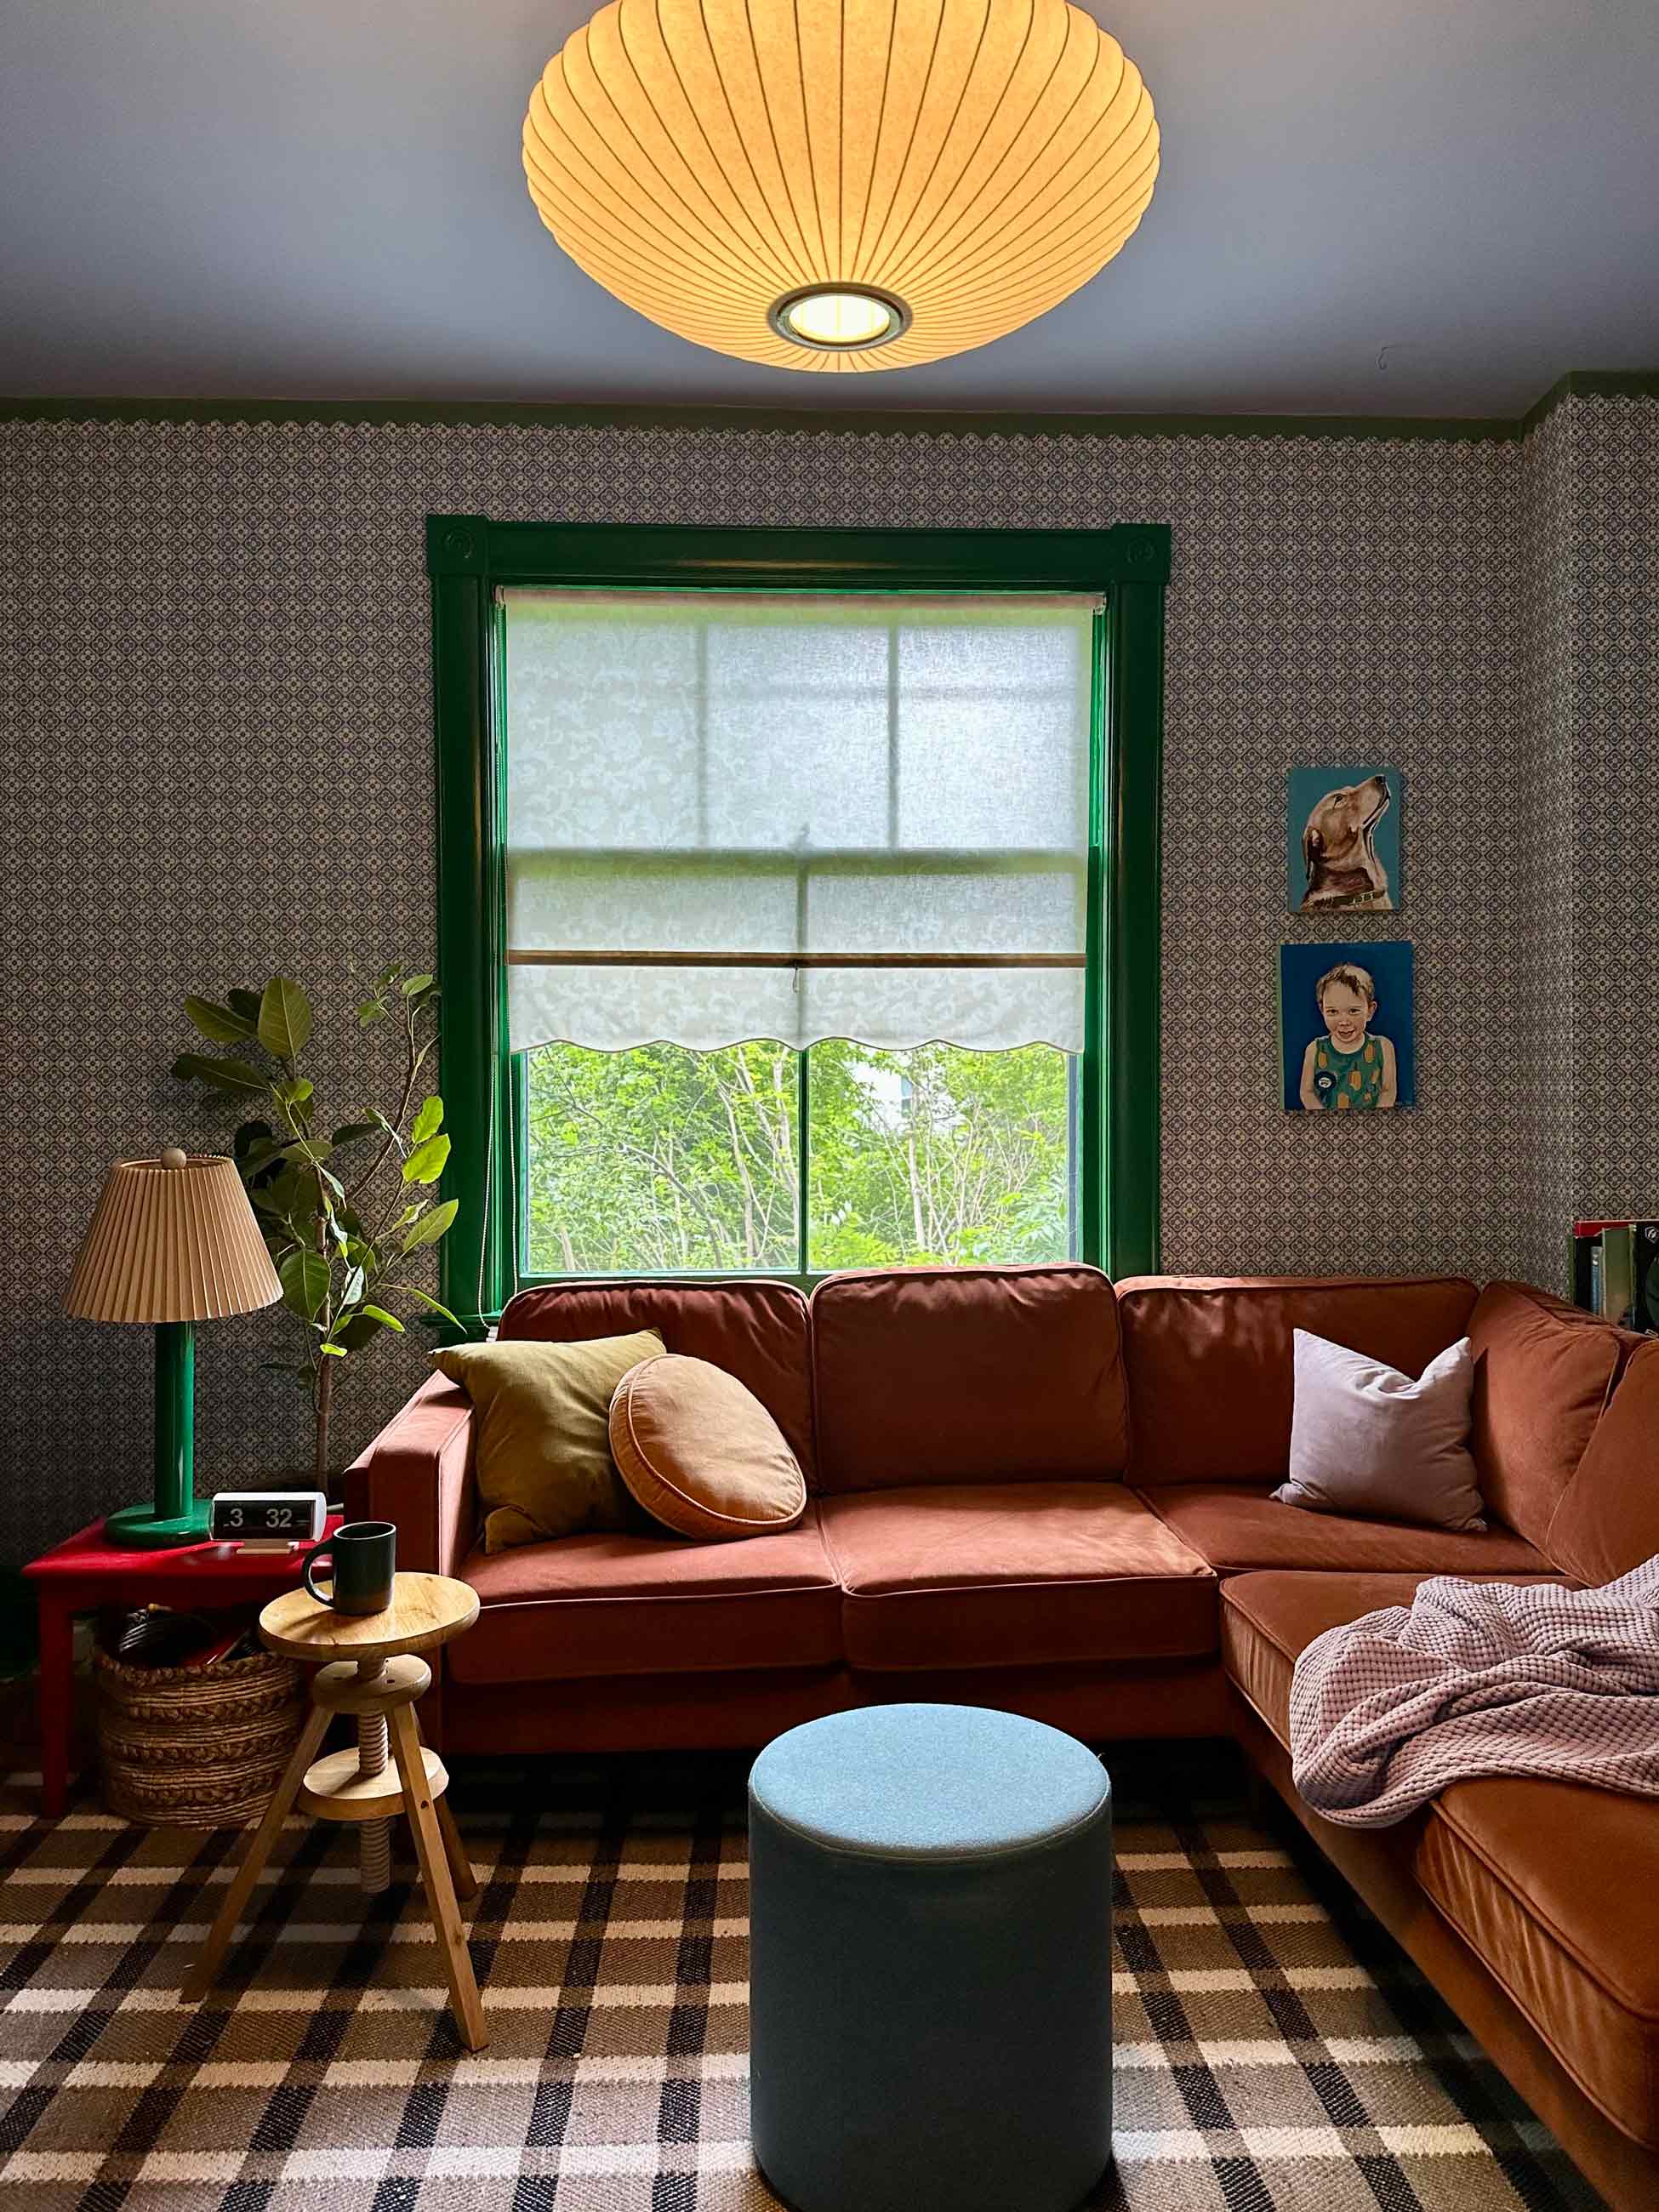 Colorful living room with wallpapered walls, green trim, and an orange sofa.